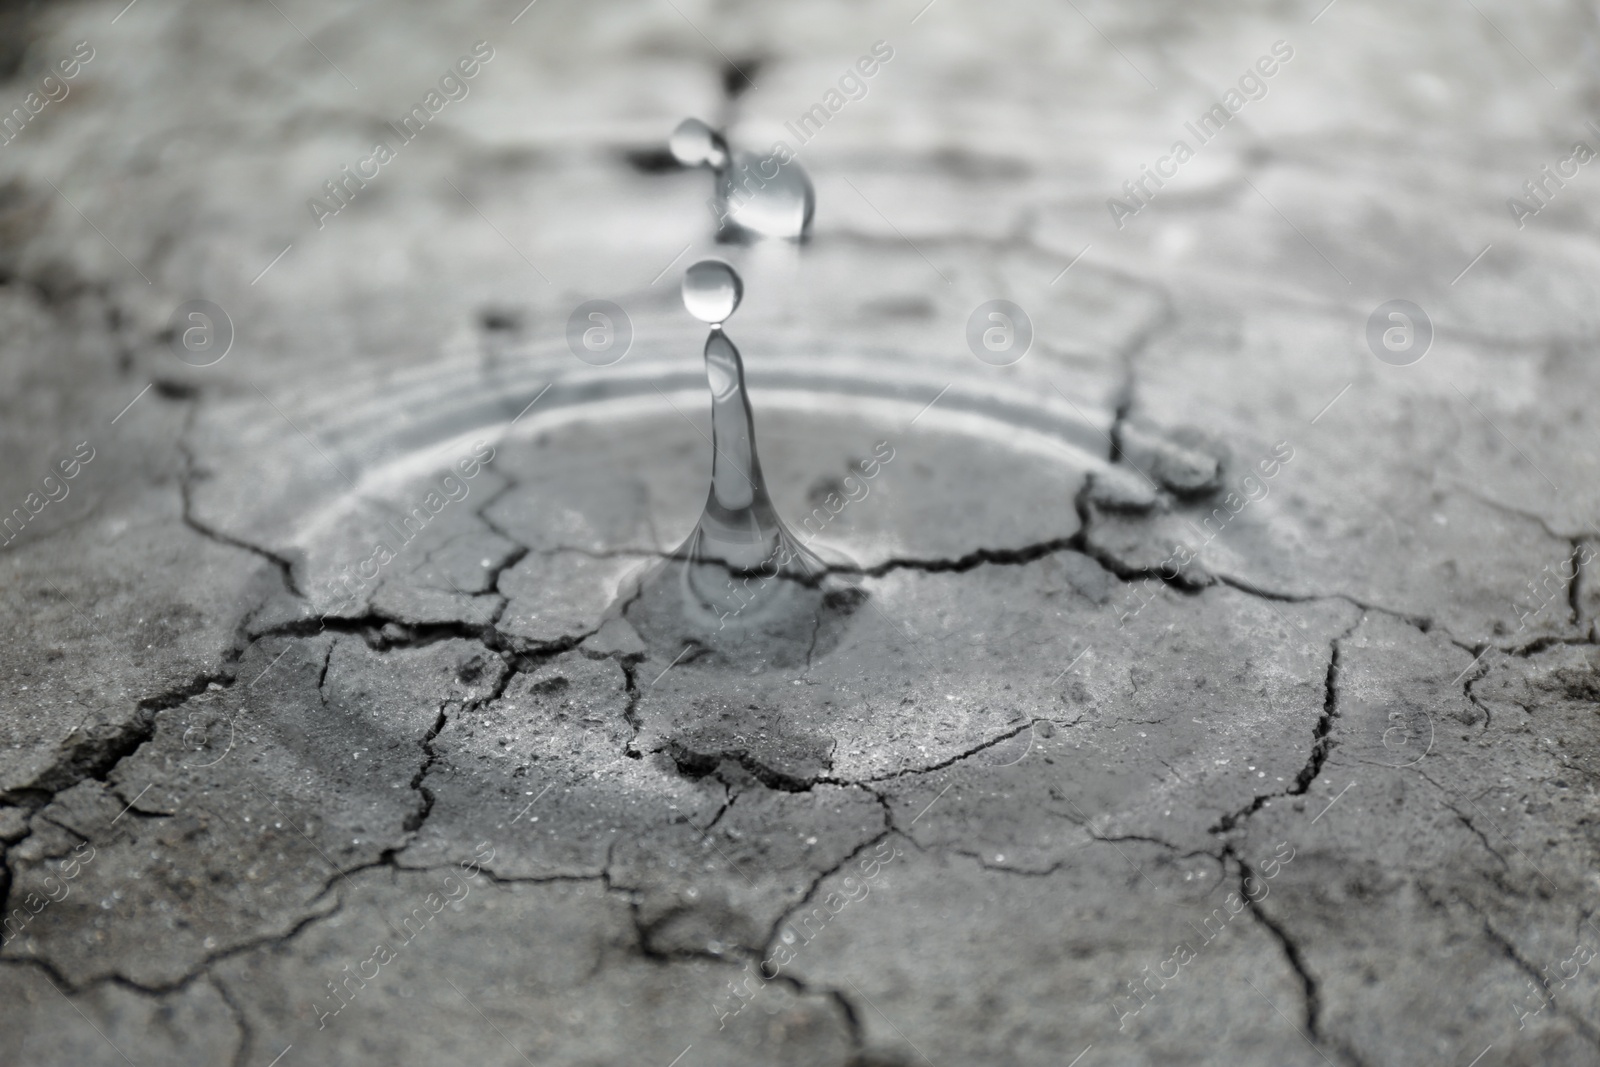 Image of Save environment. Water drops falling on dry cracked land, black and white effect